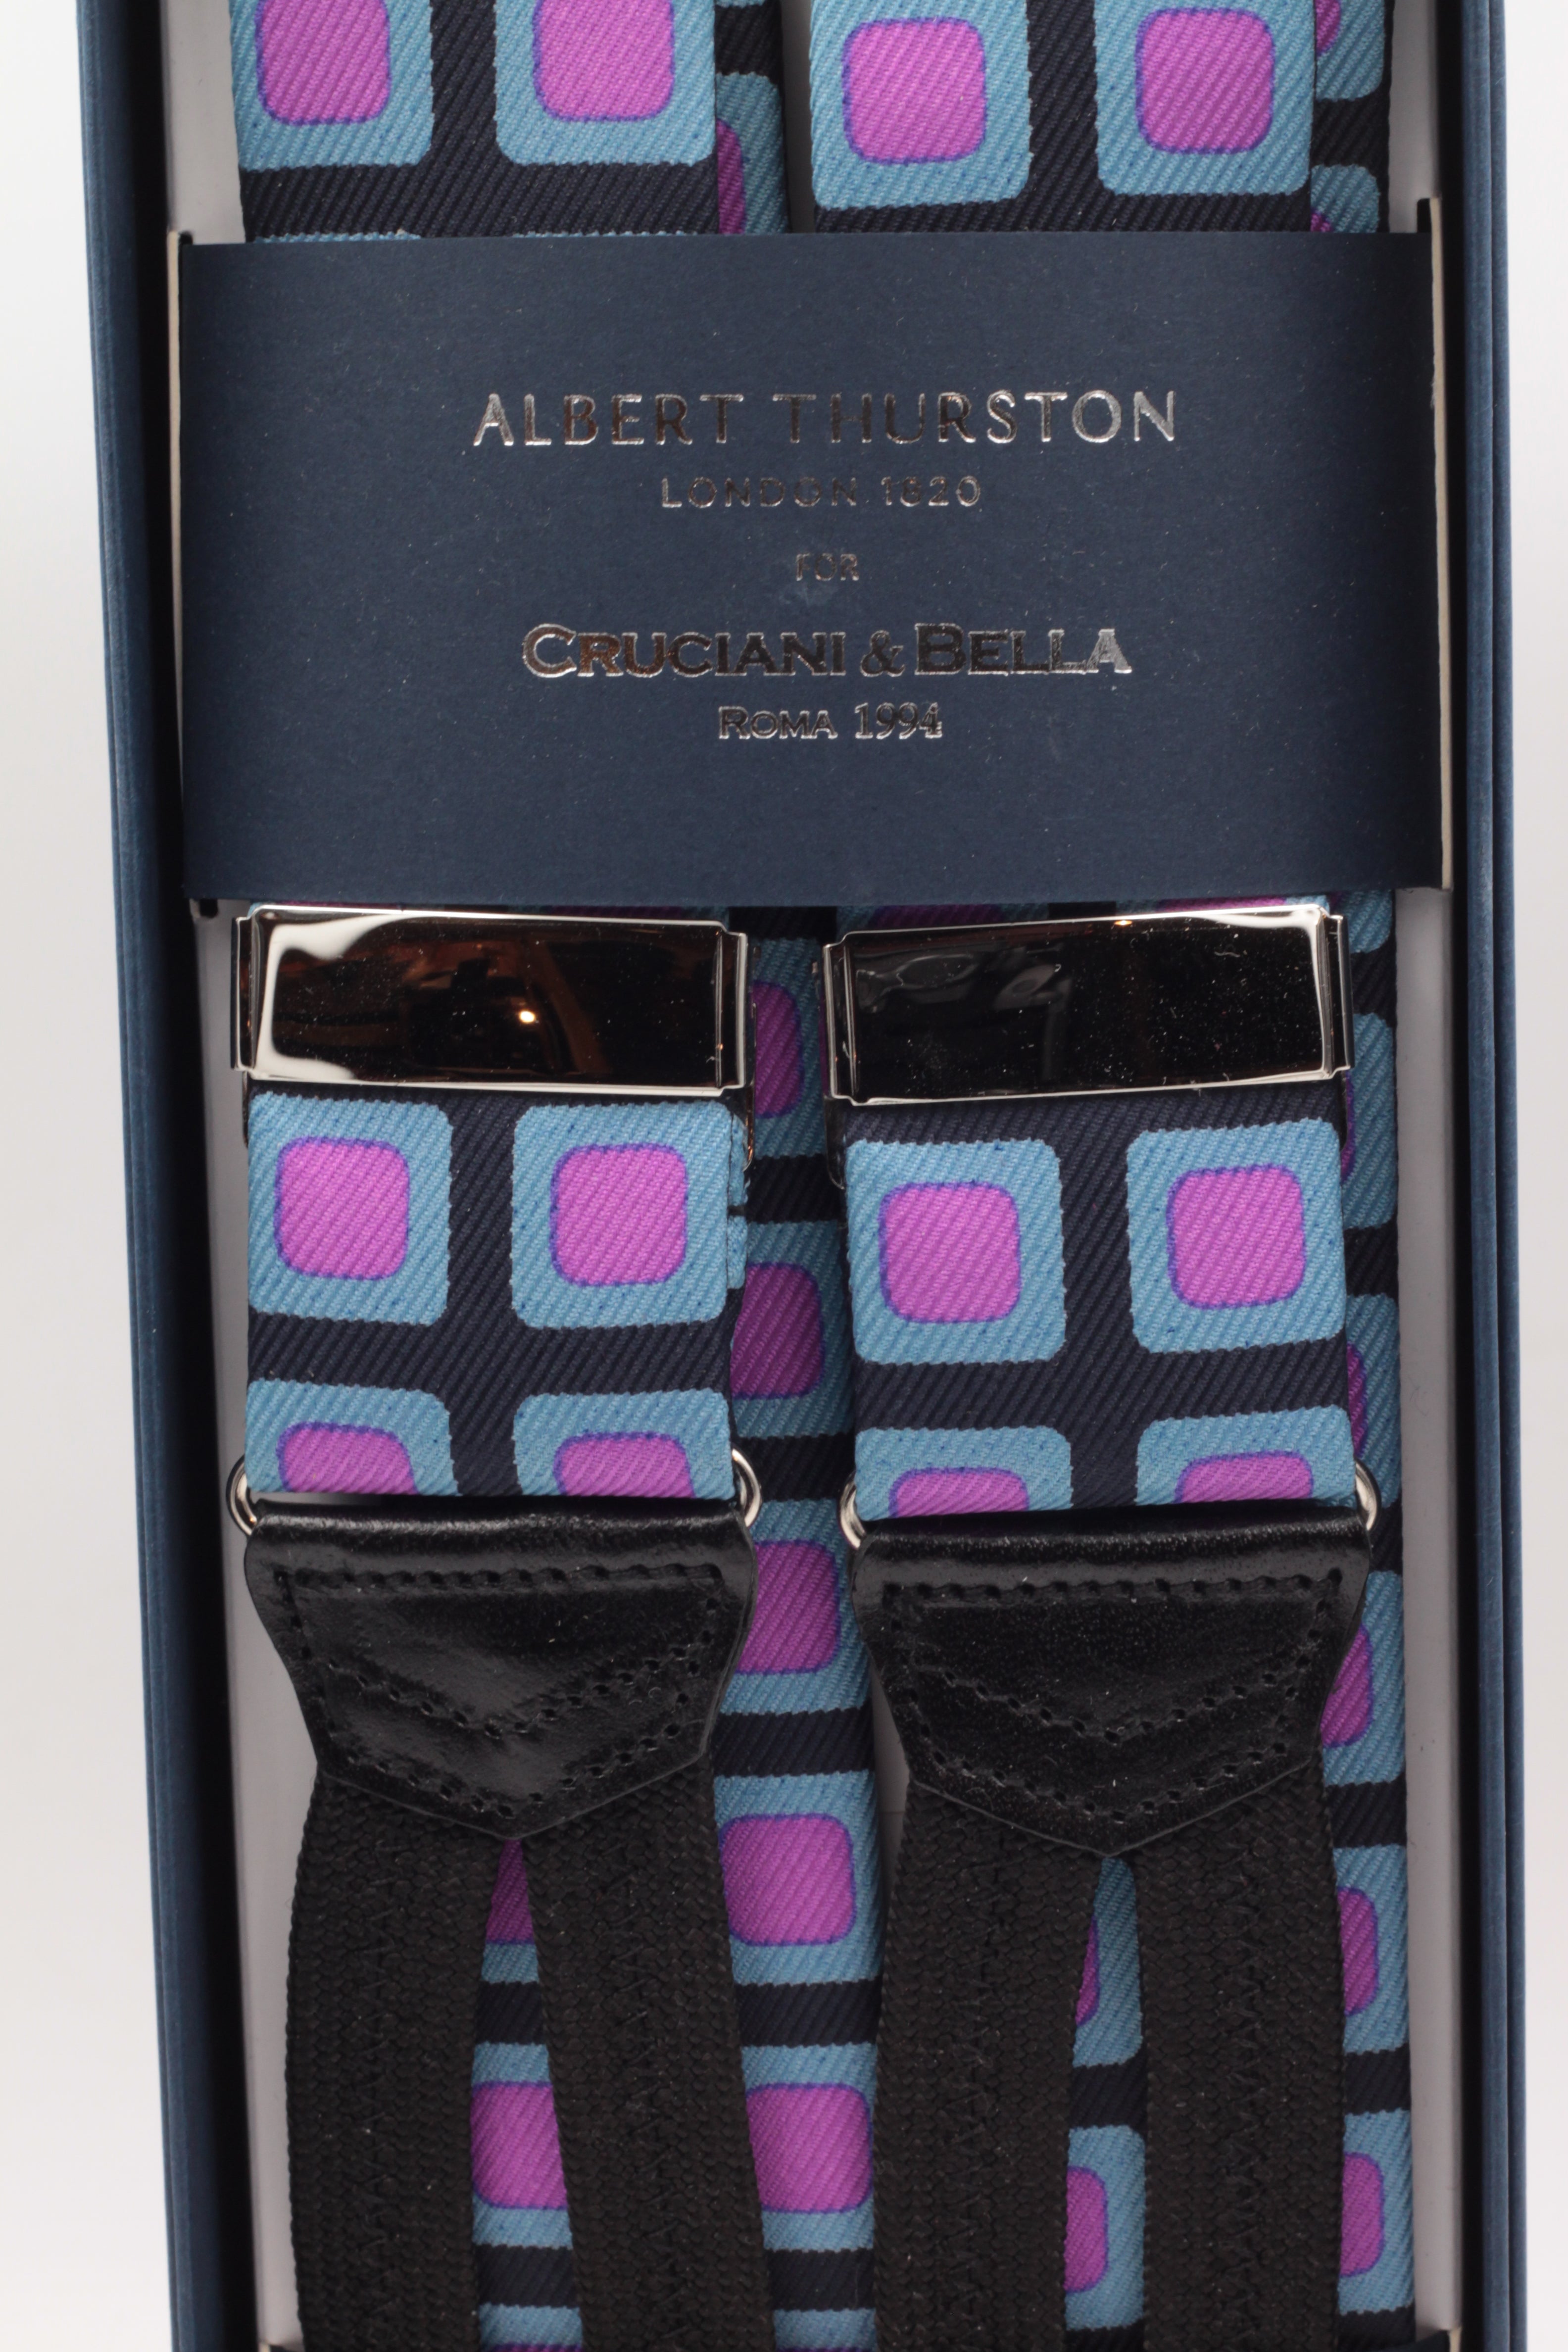 Albert Thurston for Cruciani & Bella Made in England Adjustable Sizing 40 mm Midnight blue, pink and light blue motif braces Braid ends Y-Shaped Nickel Fittings